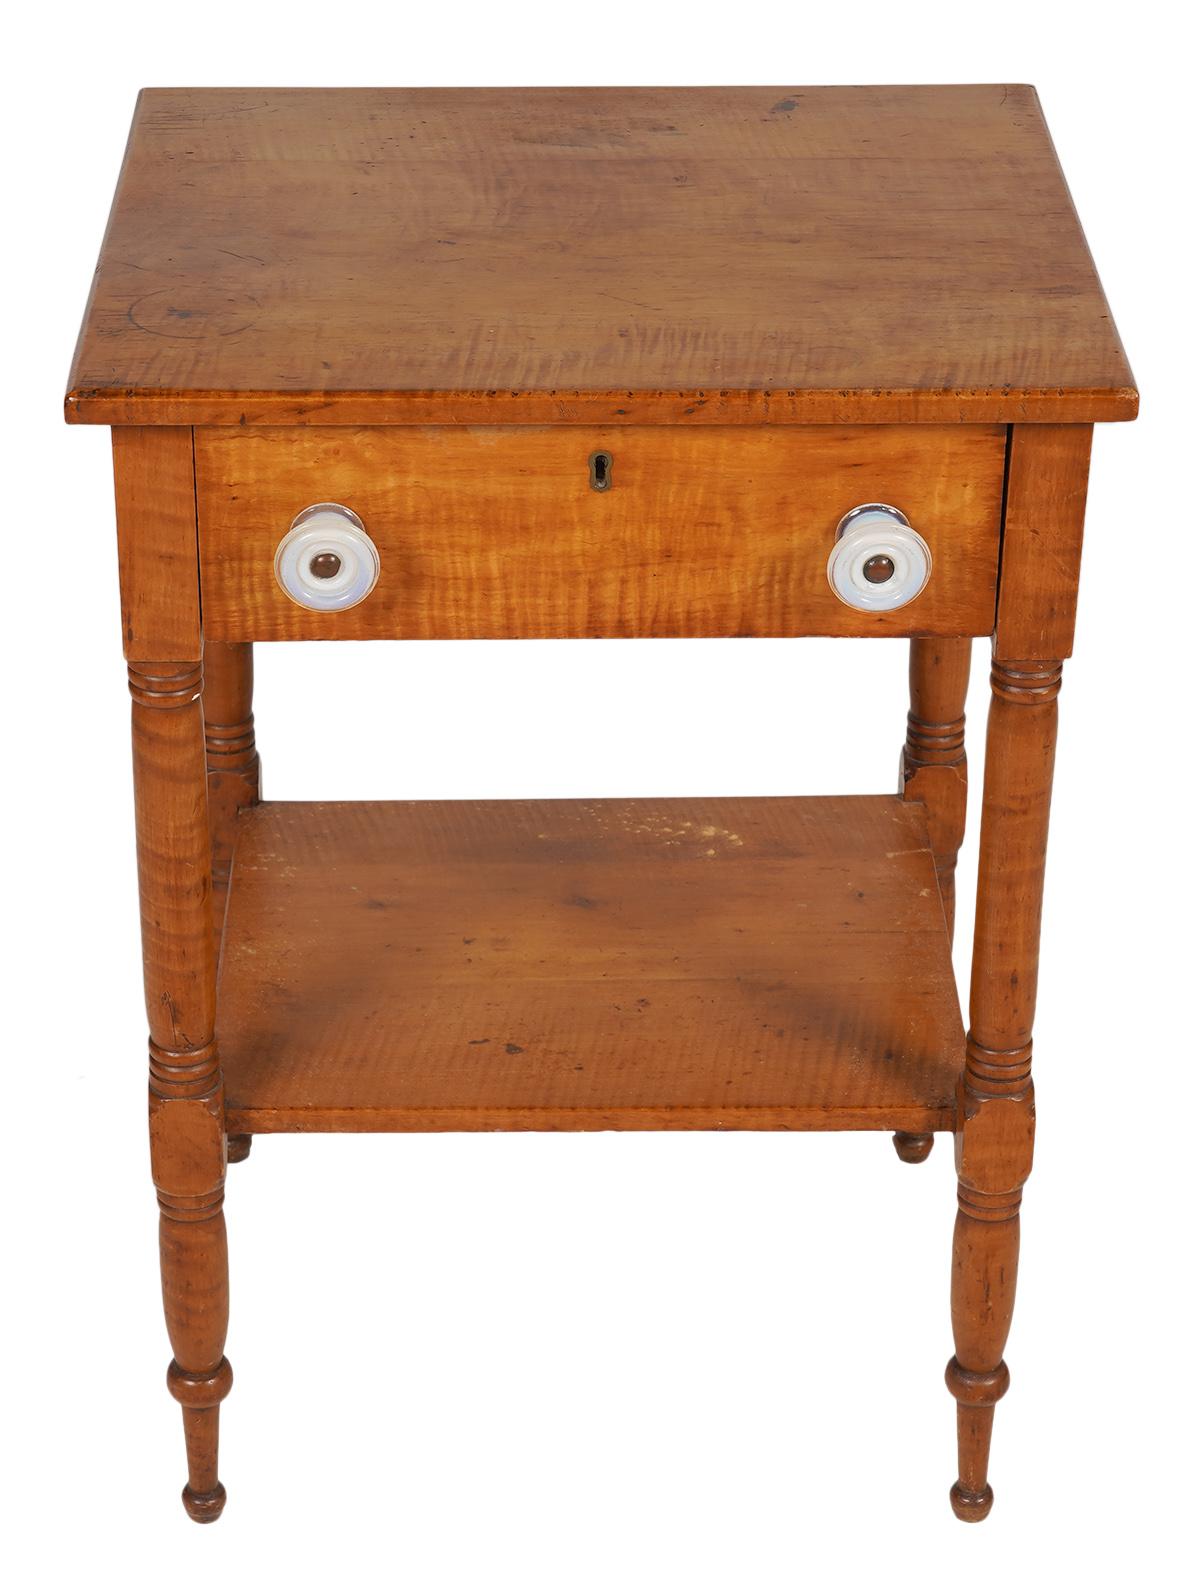 This early American tiger maple work table or stand features a top with slightly rounded edges above a frieze holding a drawer with likely original milk glass pulls. The four turned and carved legs are united by a lower shelf.